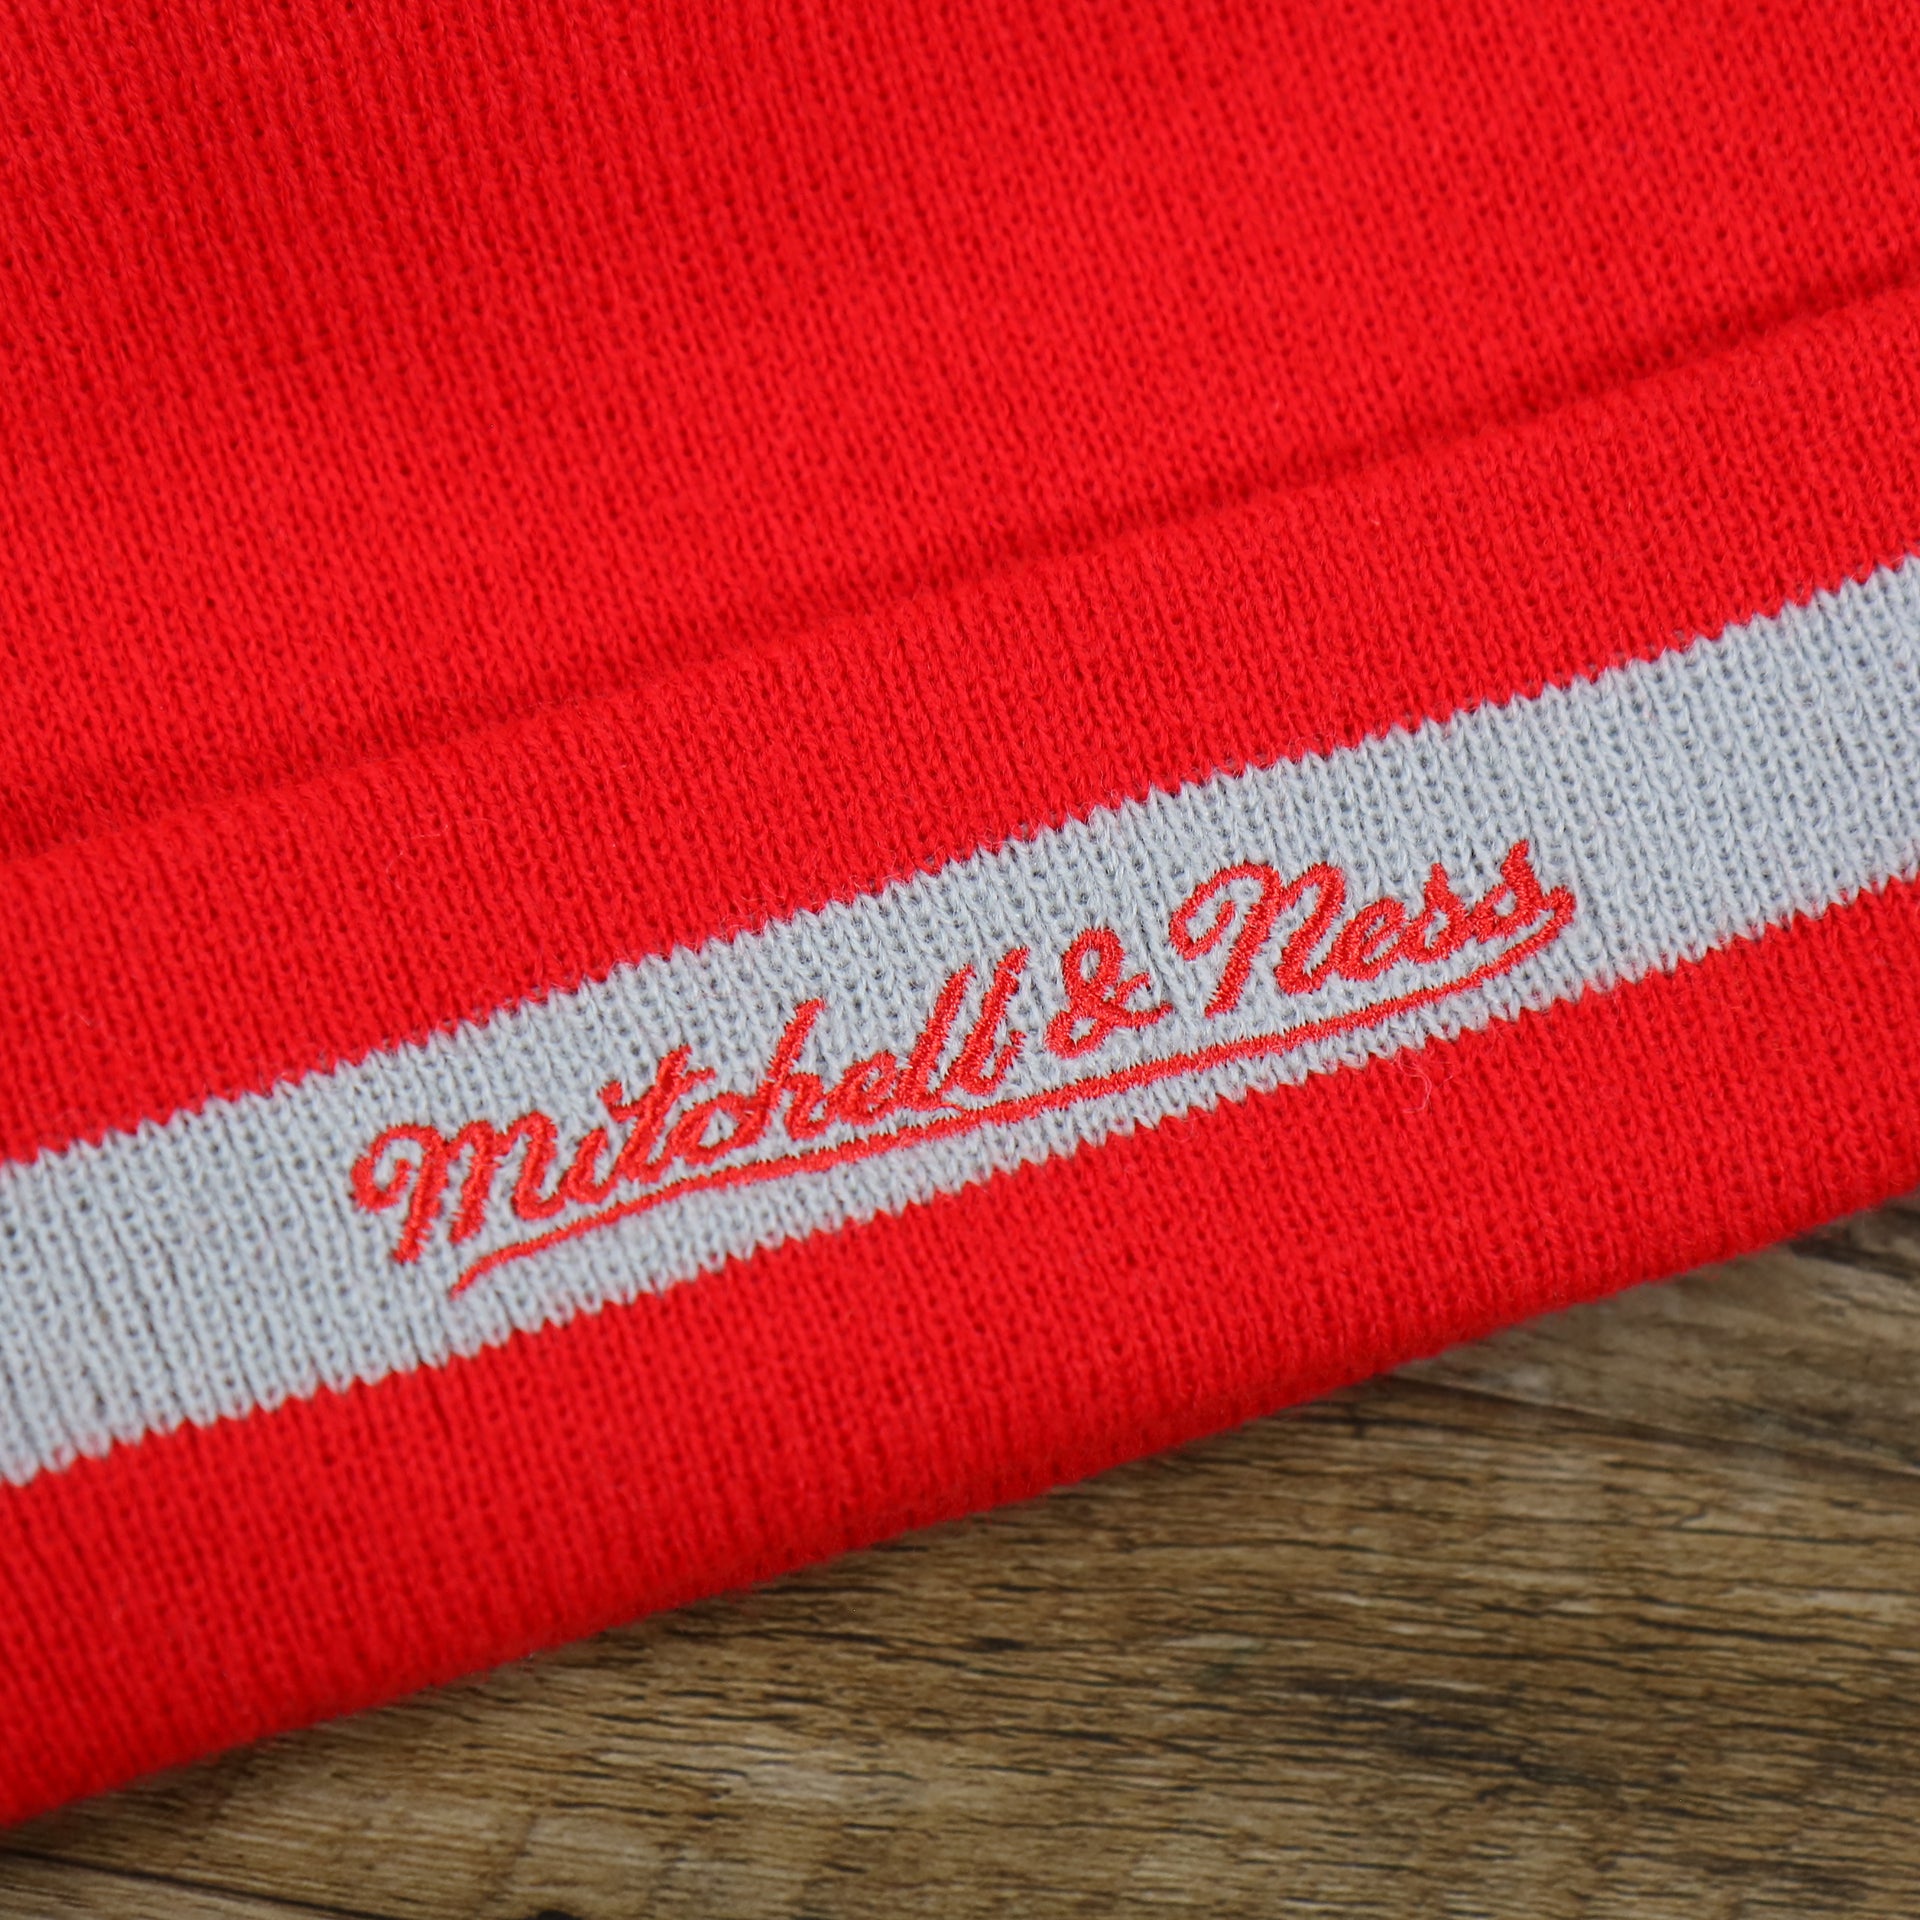 The Mitchell And Ness Script Logo on the Houston Rockets Vintage Red & Gray Beanie OSFM